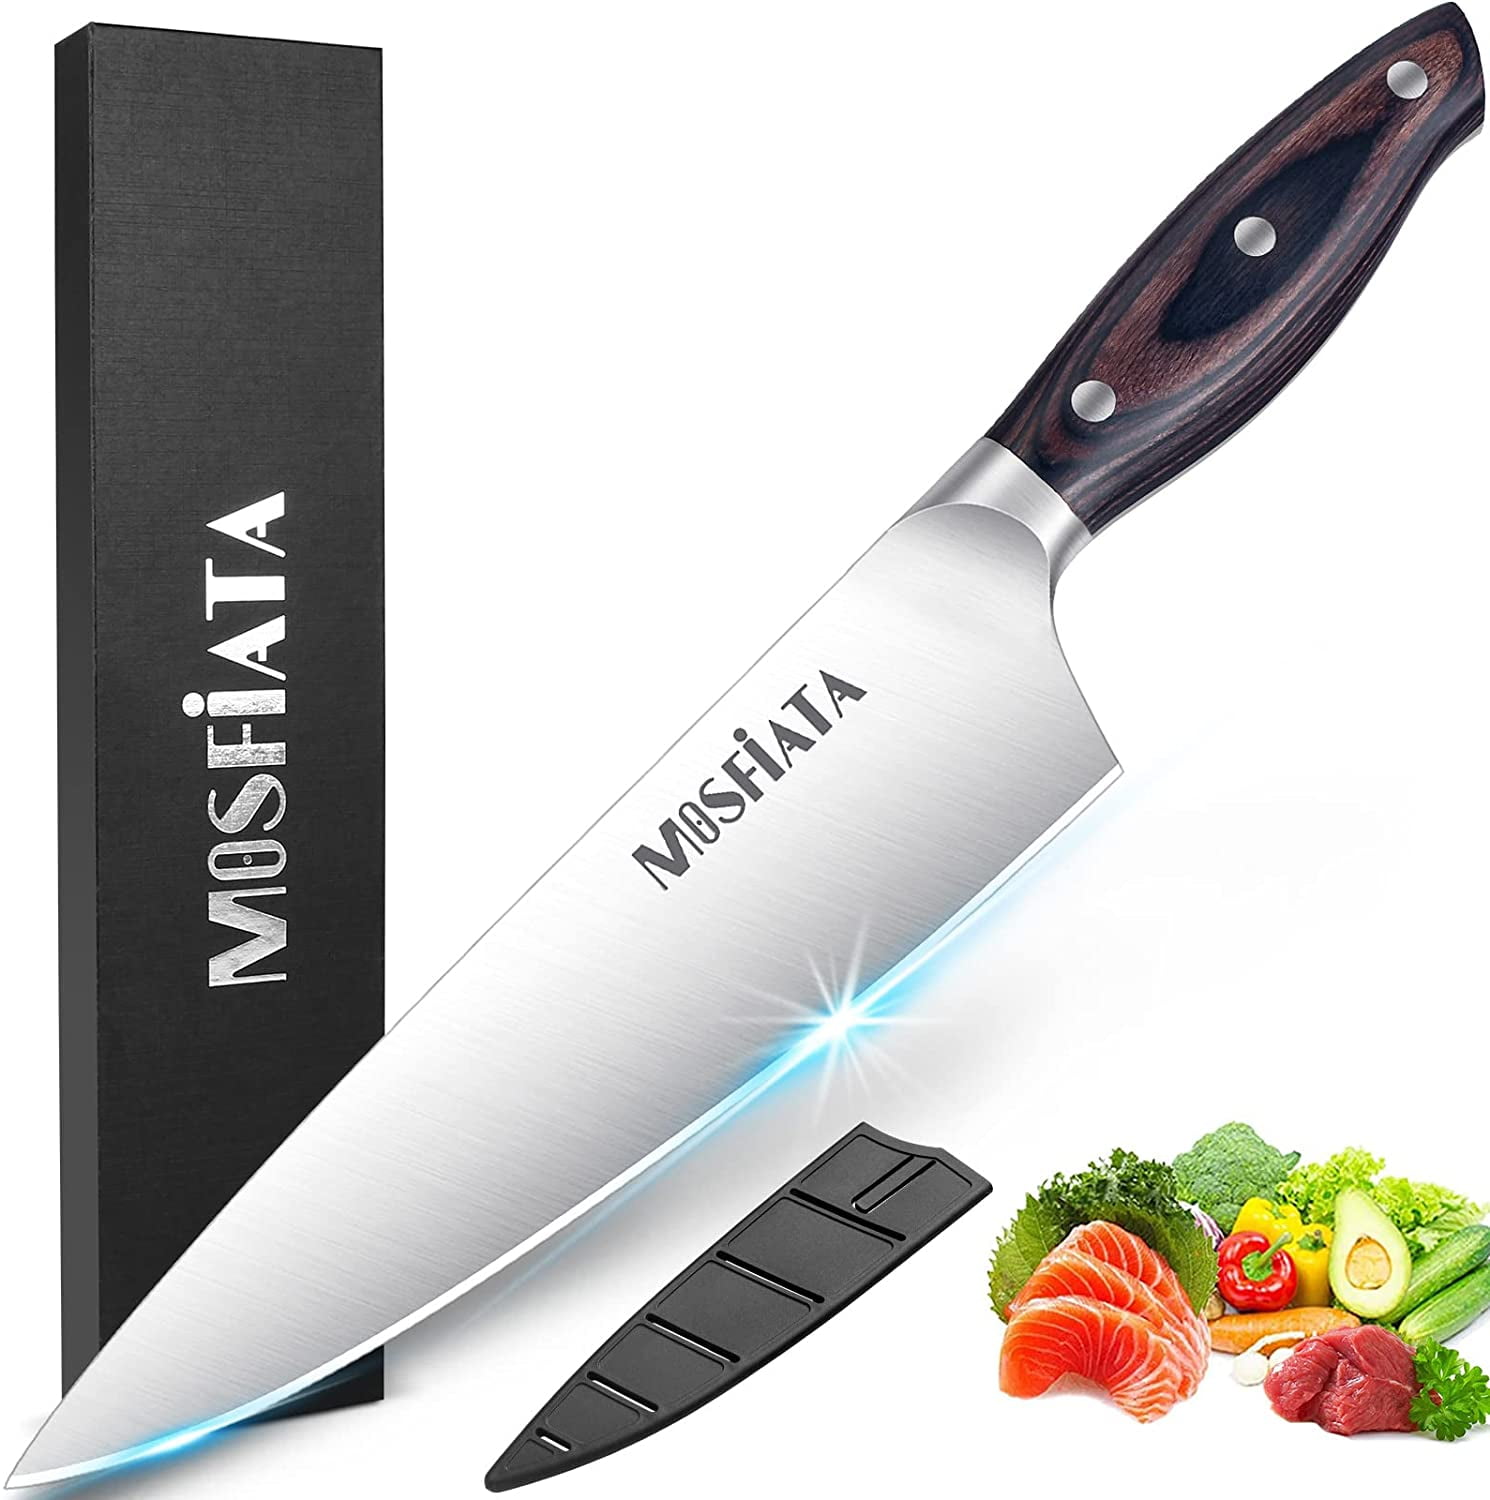 Linoroso 8 inch Chef Knife Sharp Forged German Carbon Stainless Steel Kitchen Knife with Elegant Gift Box, Black